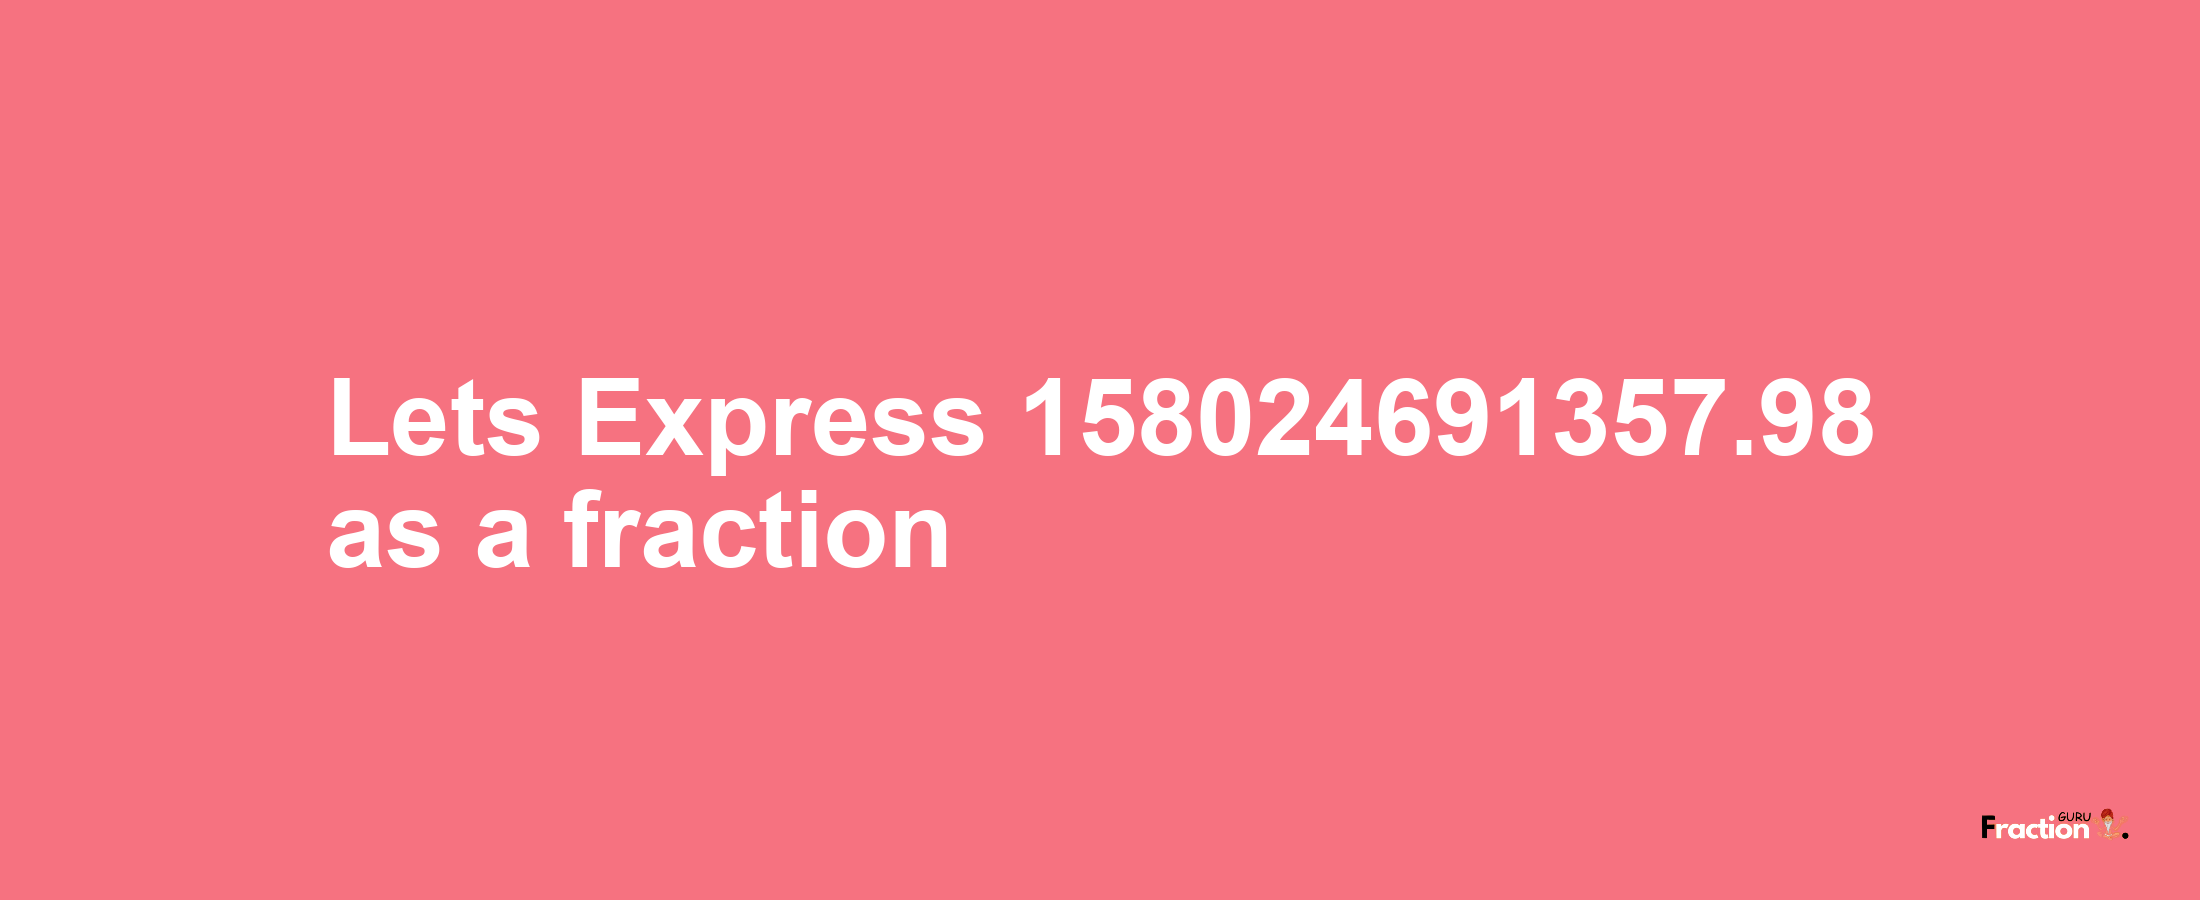 Lets Express 158024691357.98 as afraction